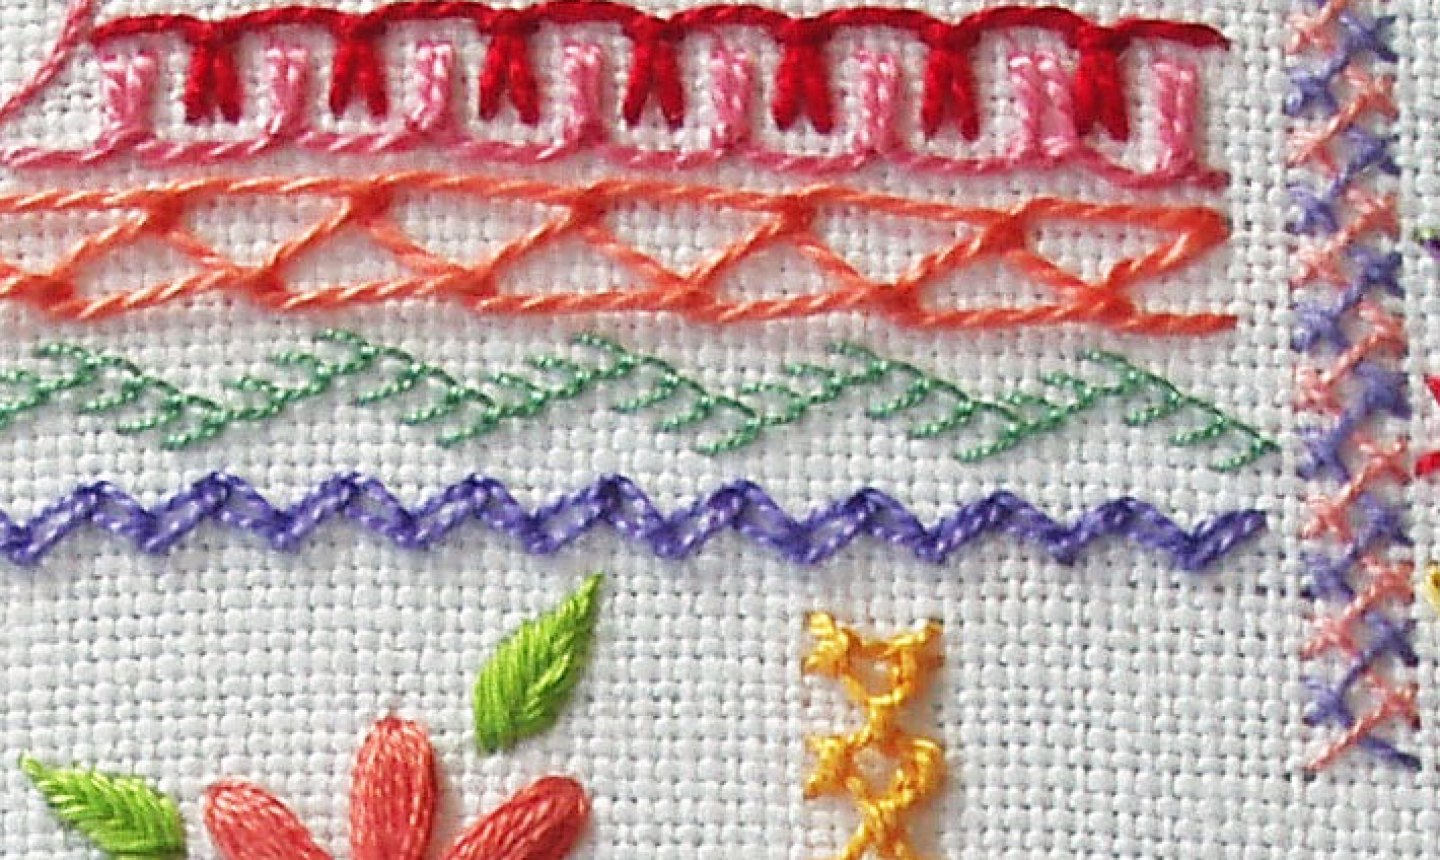 detail embroidery stitches on sampler